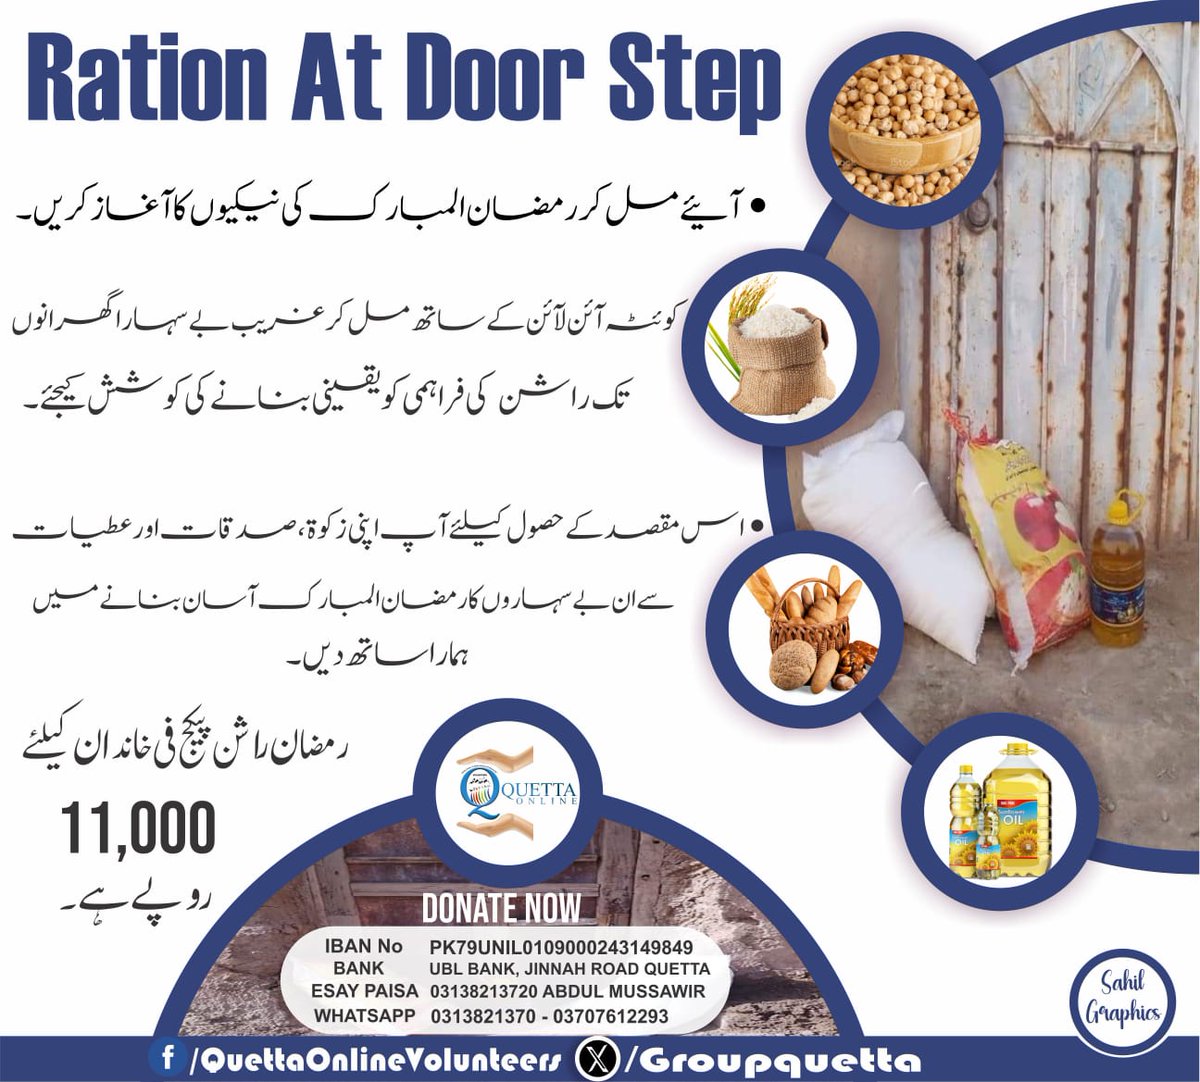 Ration Distribution in Ramadan by @Groupquetta Volunteers to needy families. Donate for this Noble cause. #RationAtDoorStep #QuettaOnlineVolunteers @ZiaKhanqta @Aurangtweets